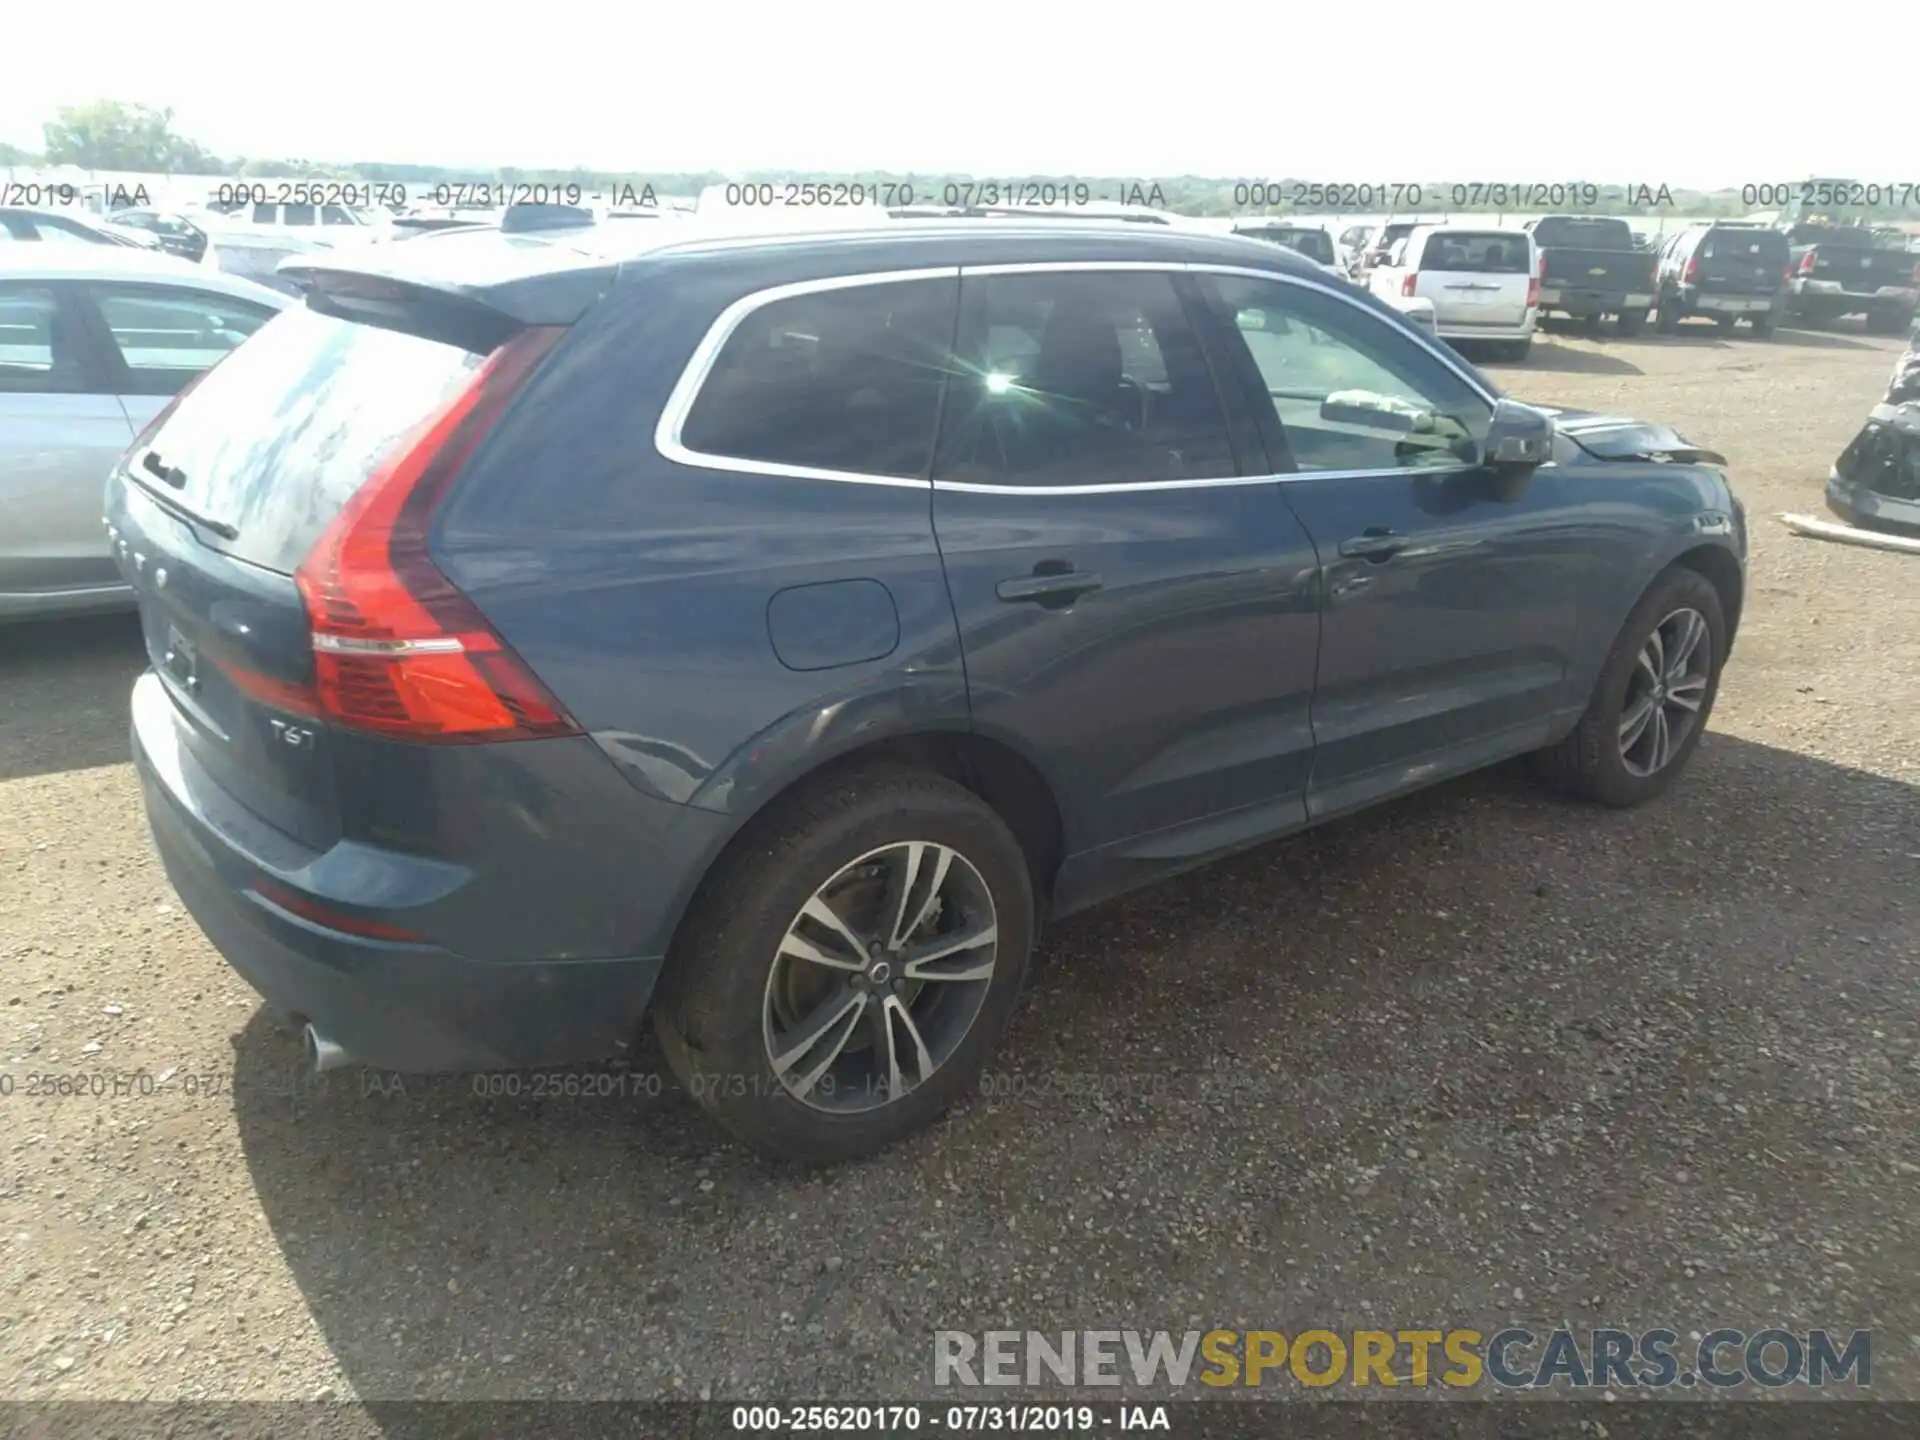 4 Photograph of a damaged car YV4A22RK2K1328433 VOLVO XC60 2019